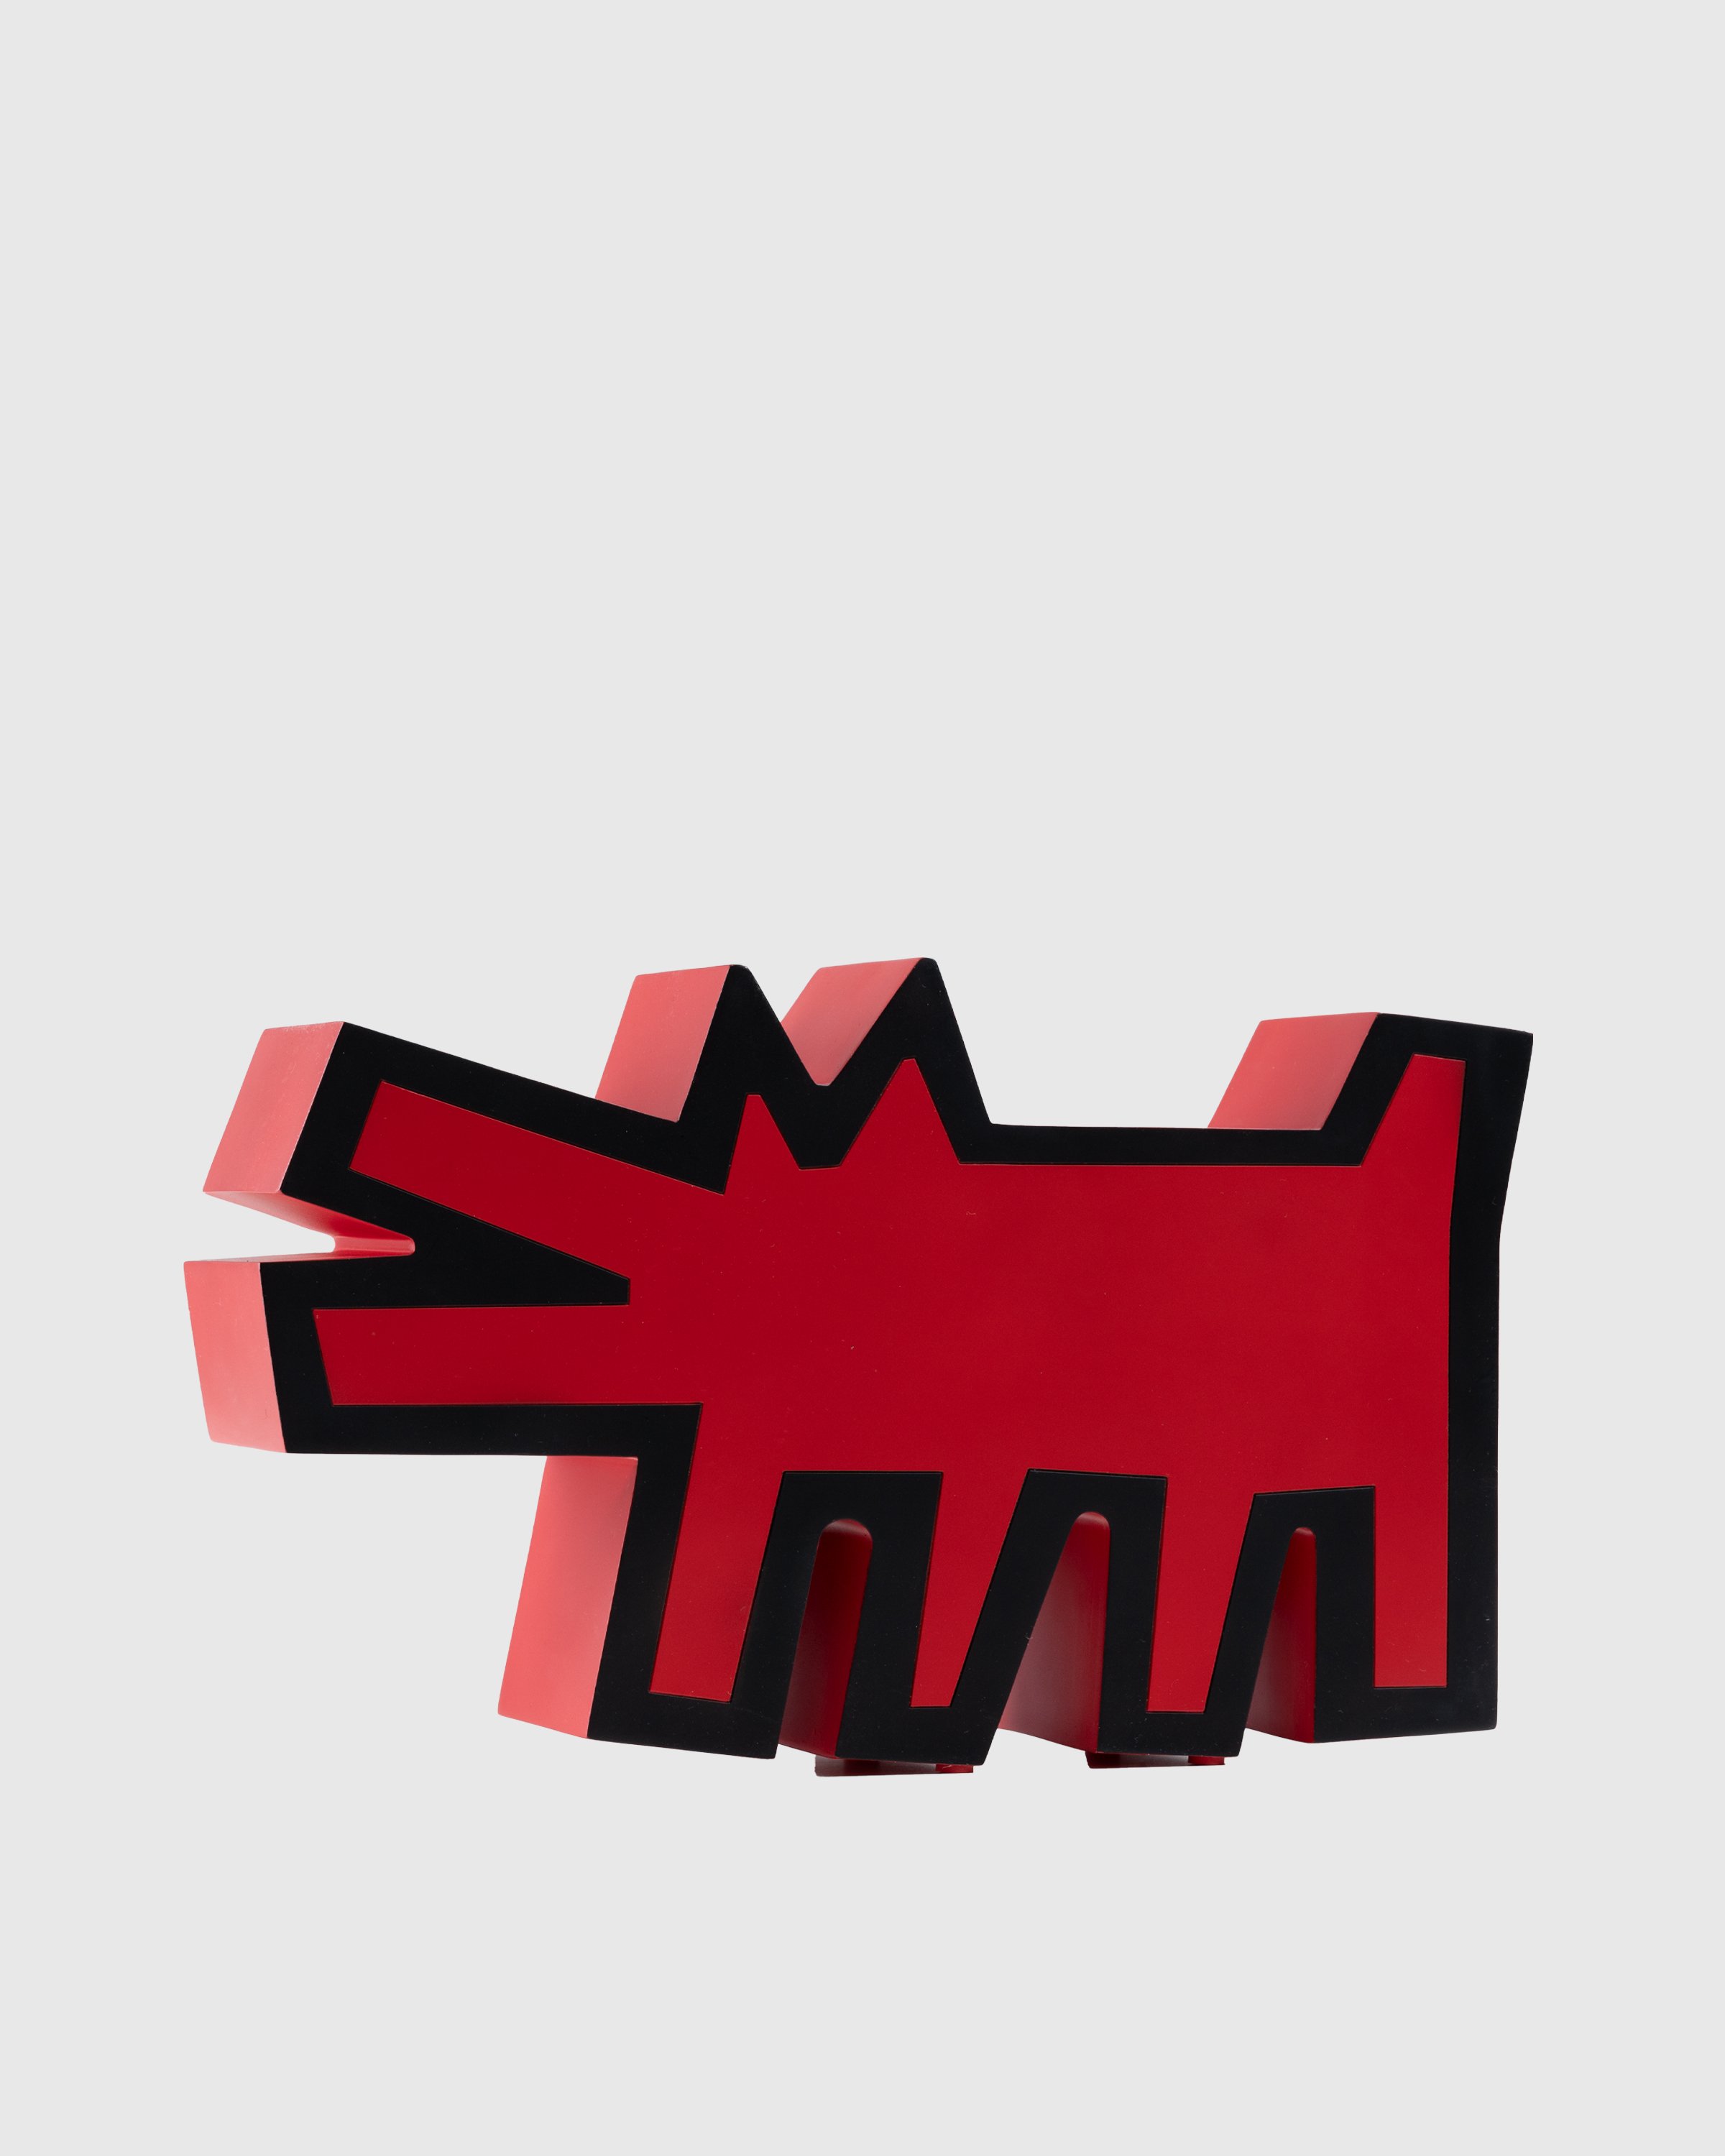 Medicom - Keith Haring Barking Dog Statue Red - Lifestyle - Red - Image 2